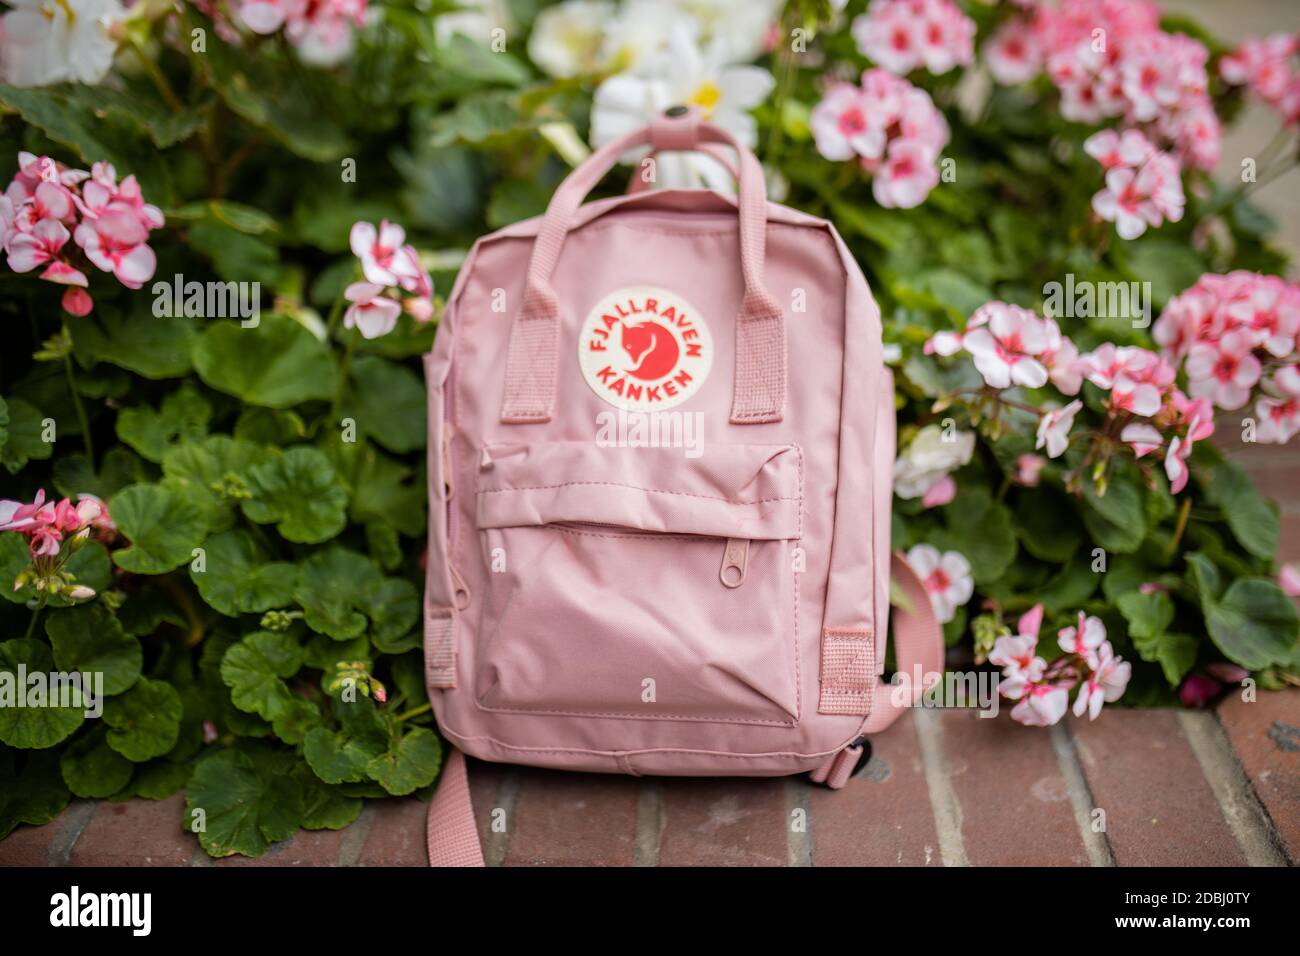 Pink backpack on a brick planter with plants and pink flowers Stock Photo